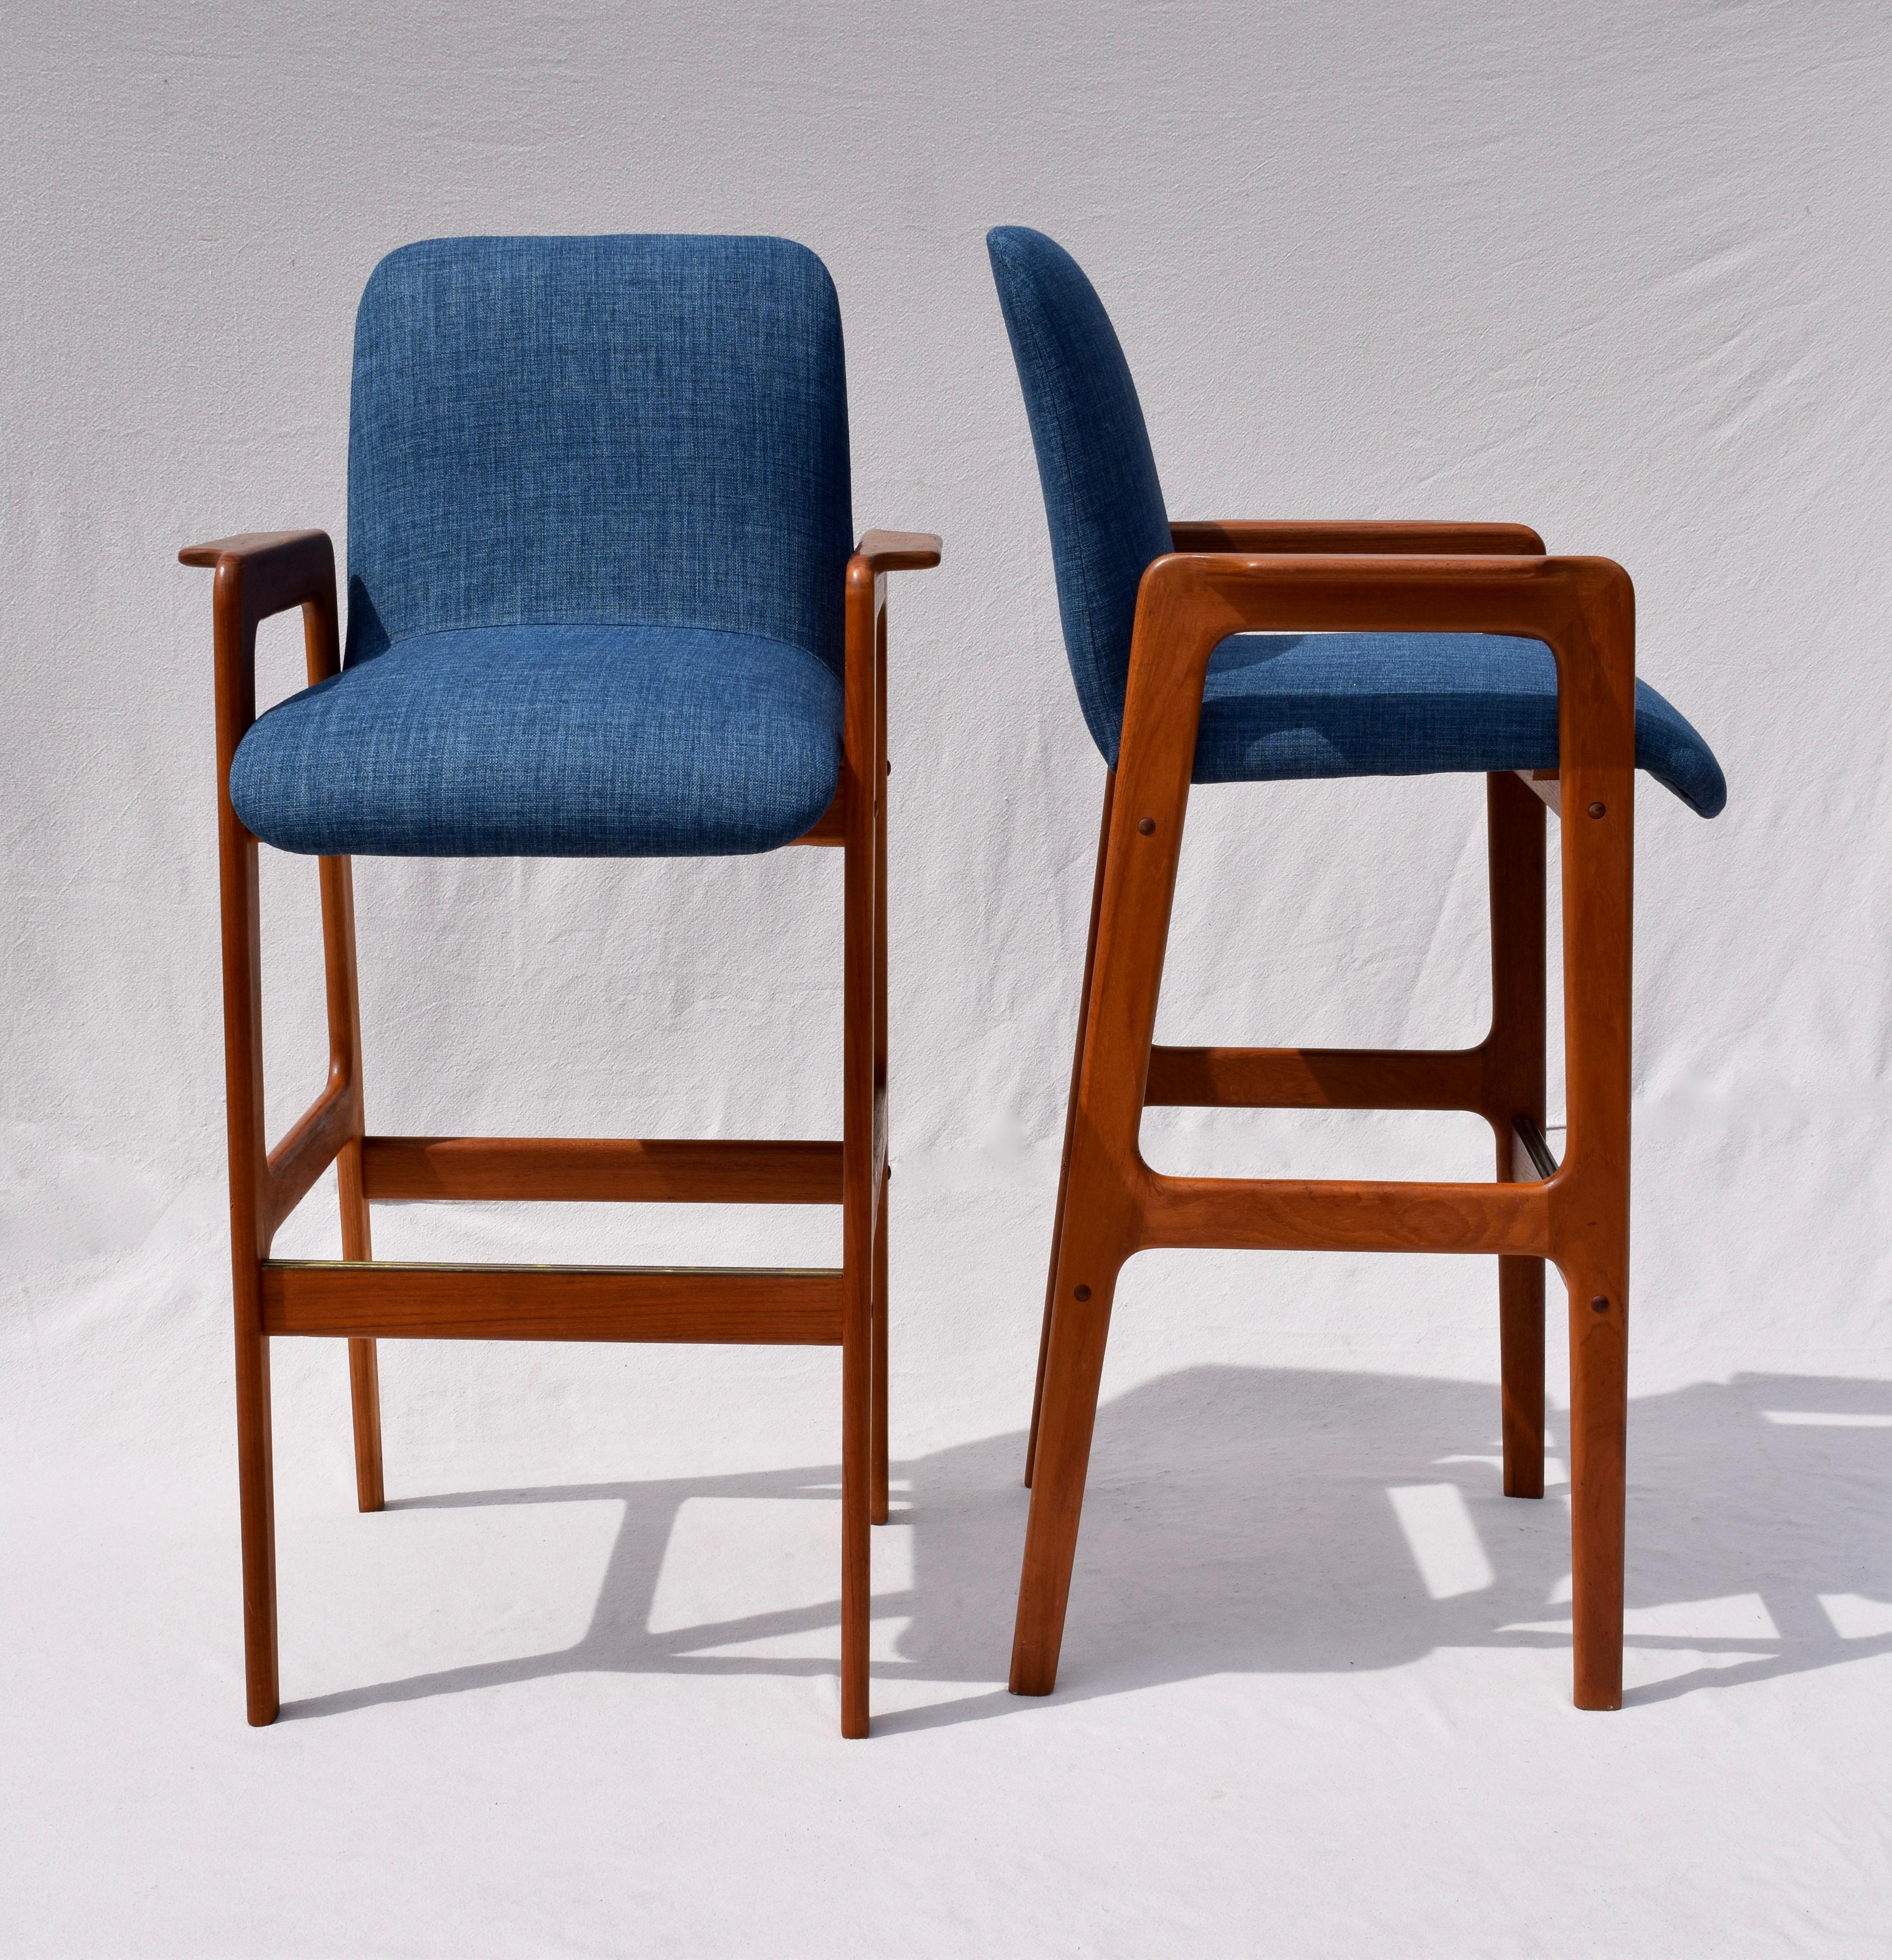 Danish modern pair of teak bar stools with brass lined foot rail and new indigo blue upholstery, circa 1970s.